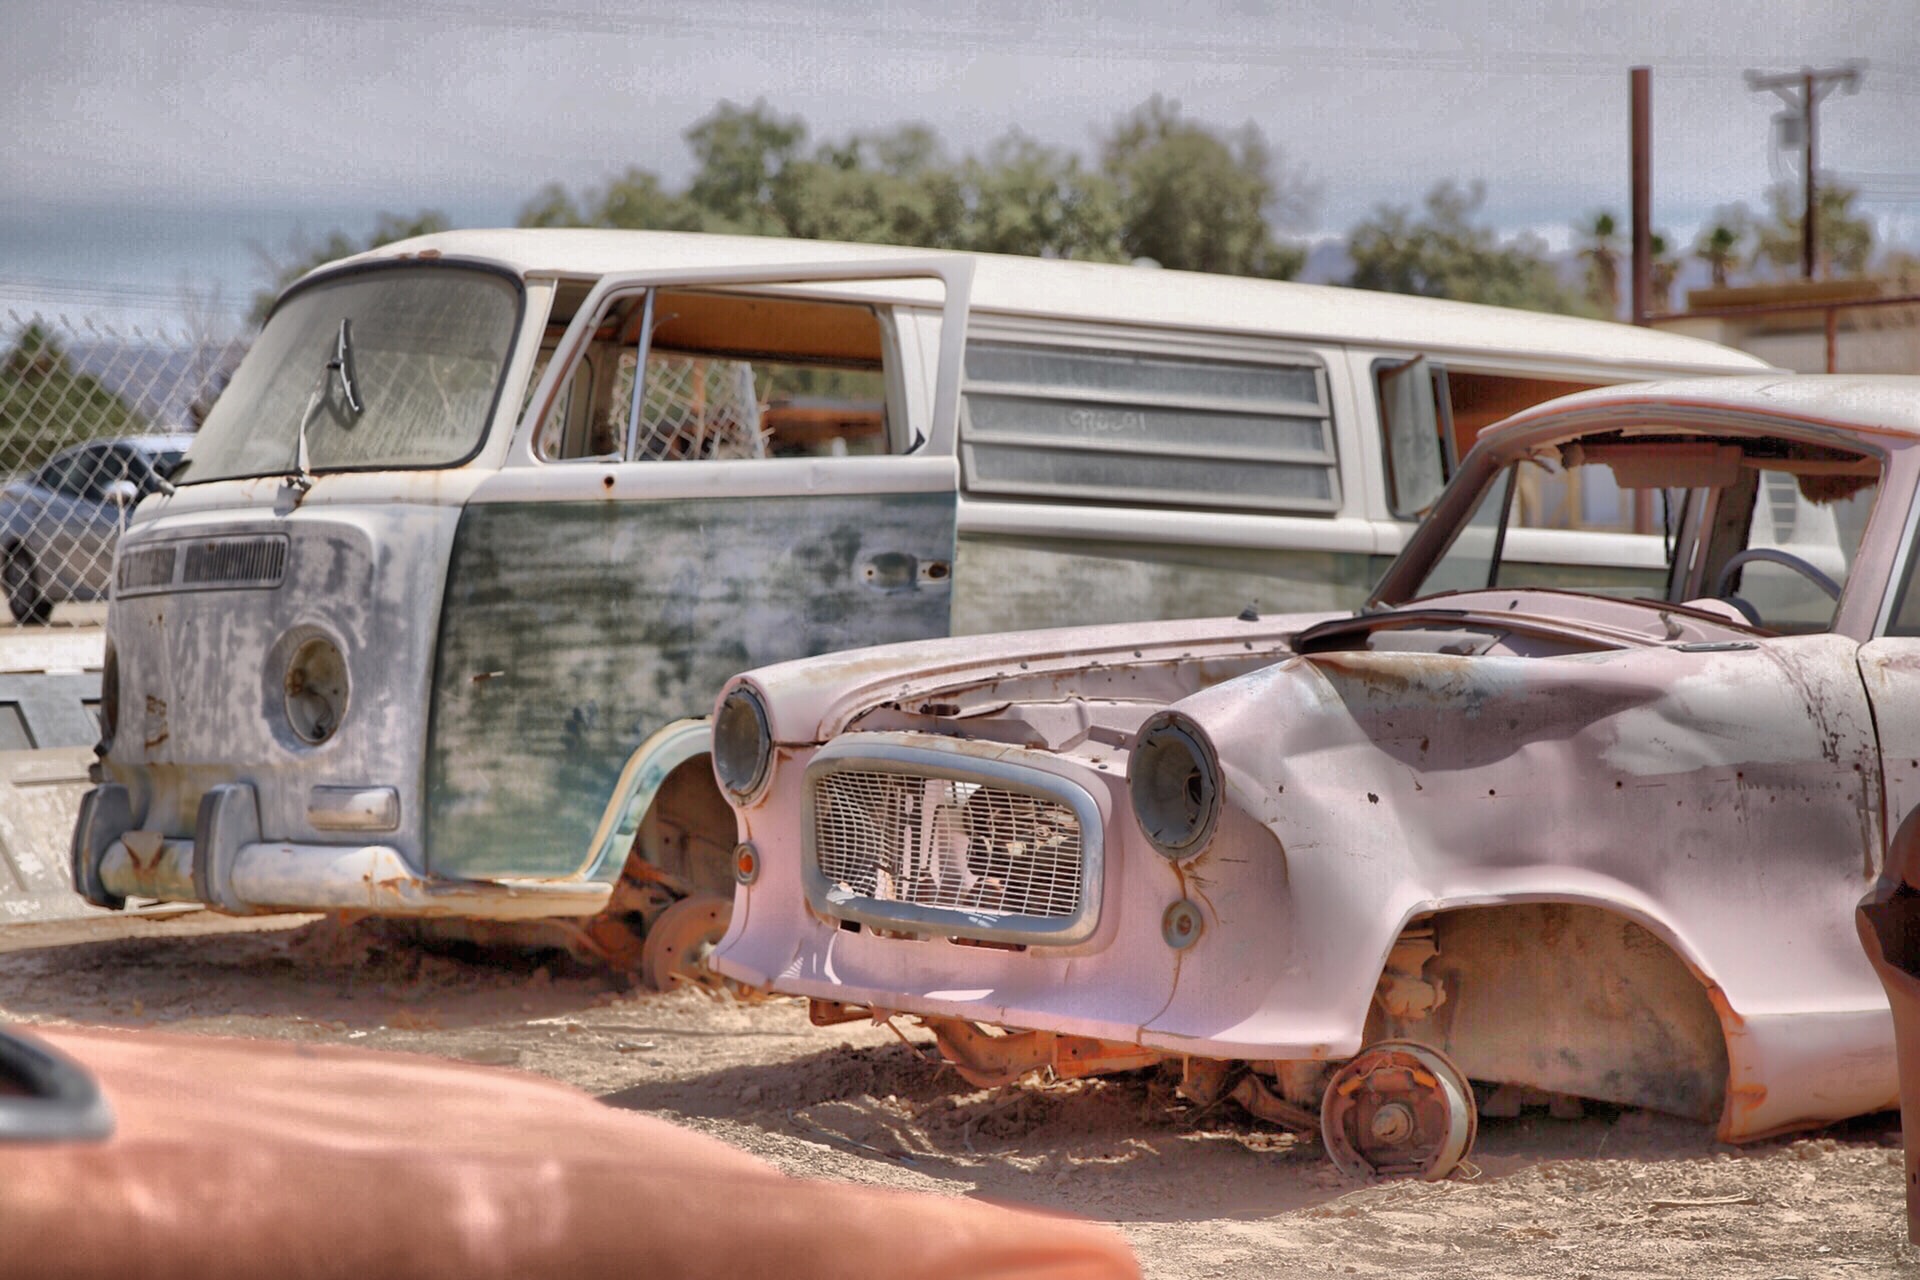 How much will a junkyard give me for my car?